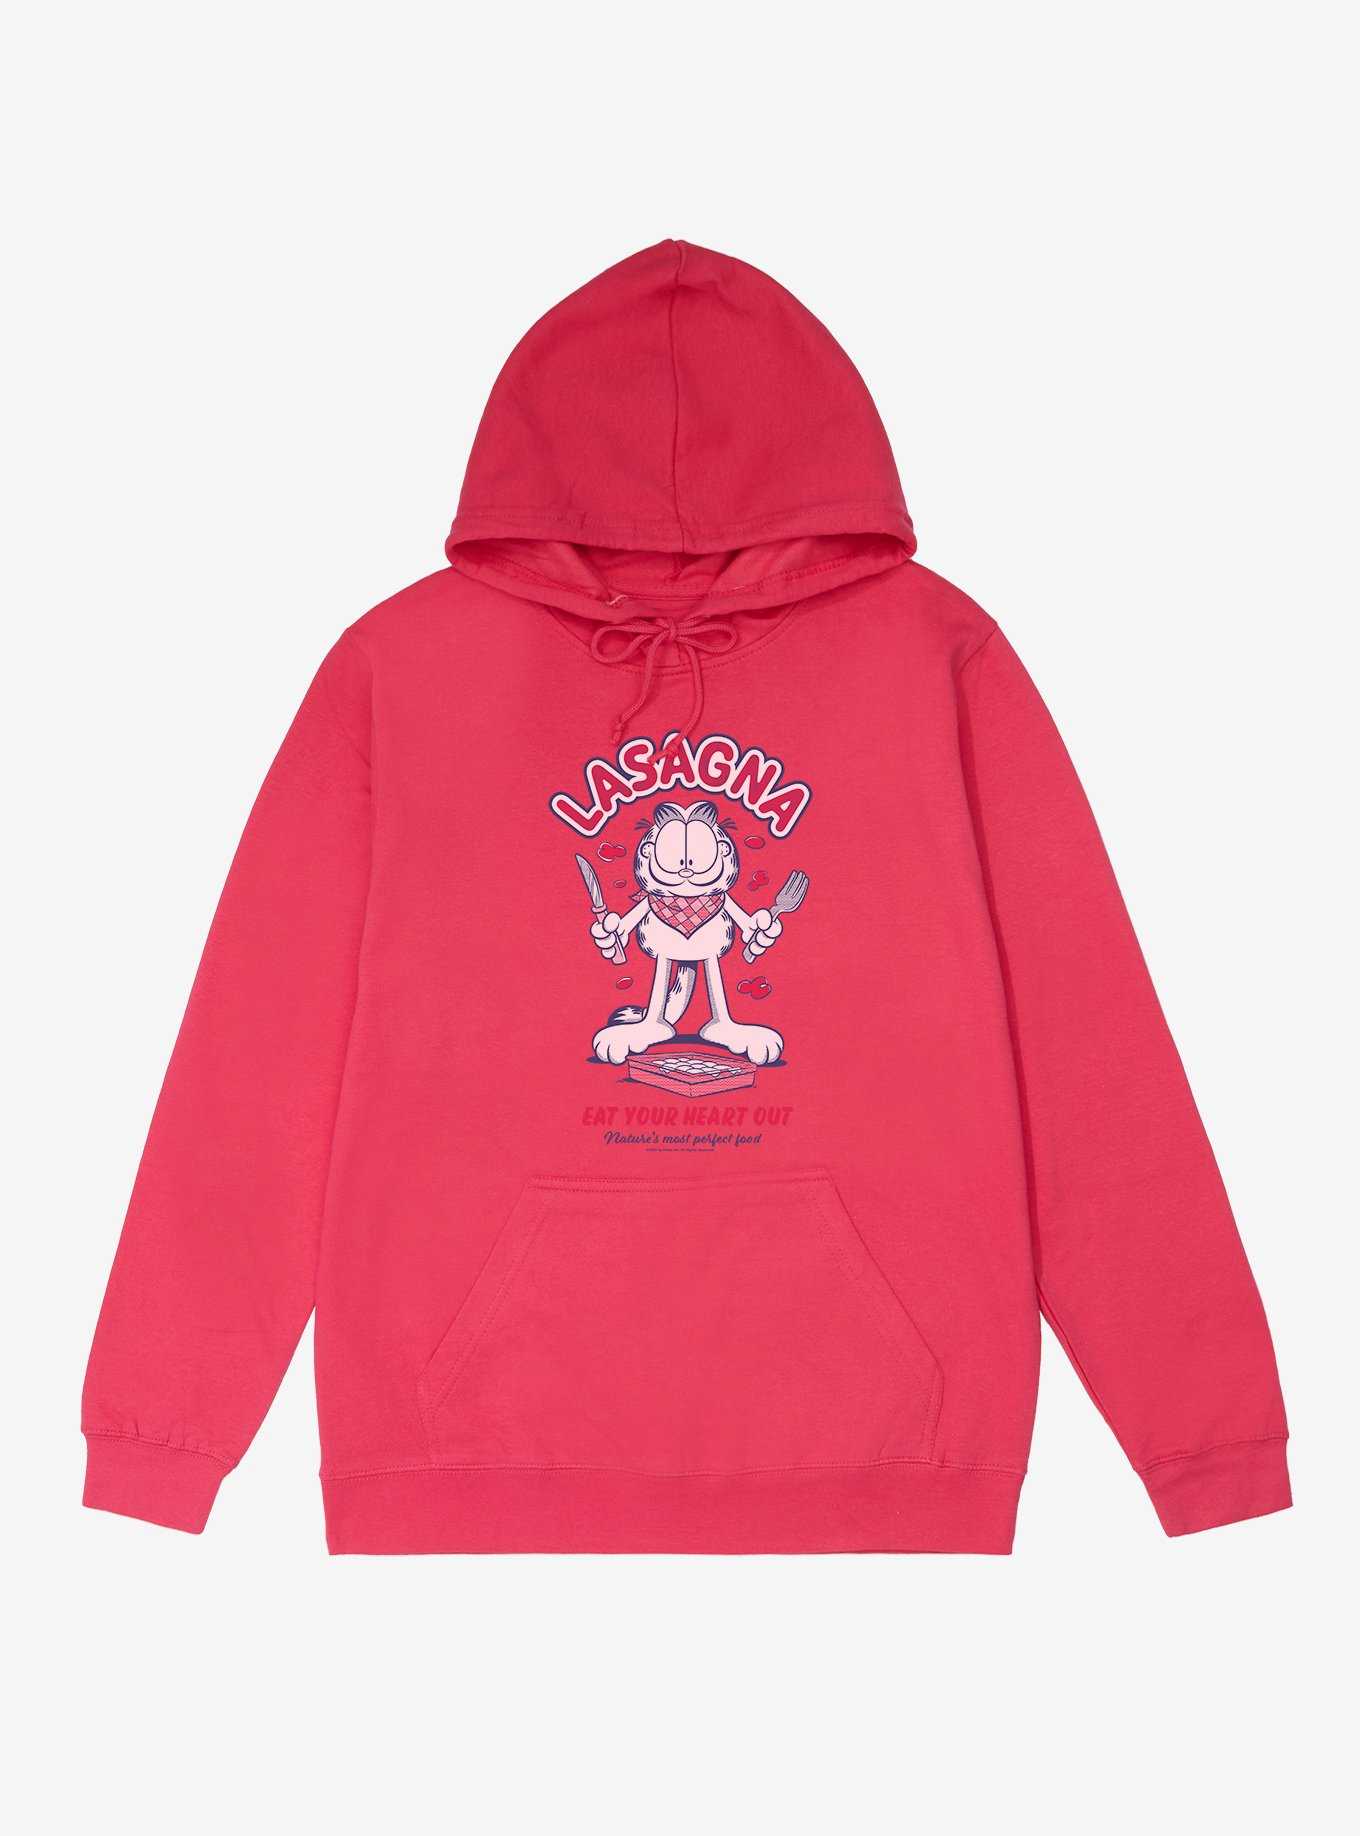 Garfield Eat Your Heart Out French Terry Hoodie, , hi-res